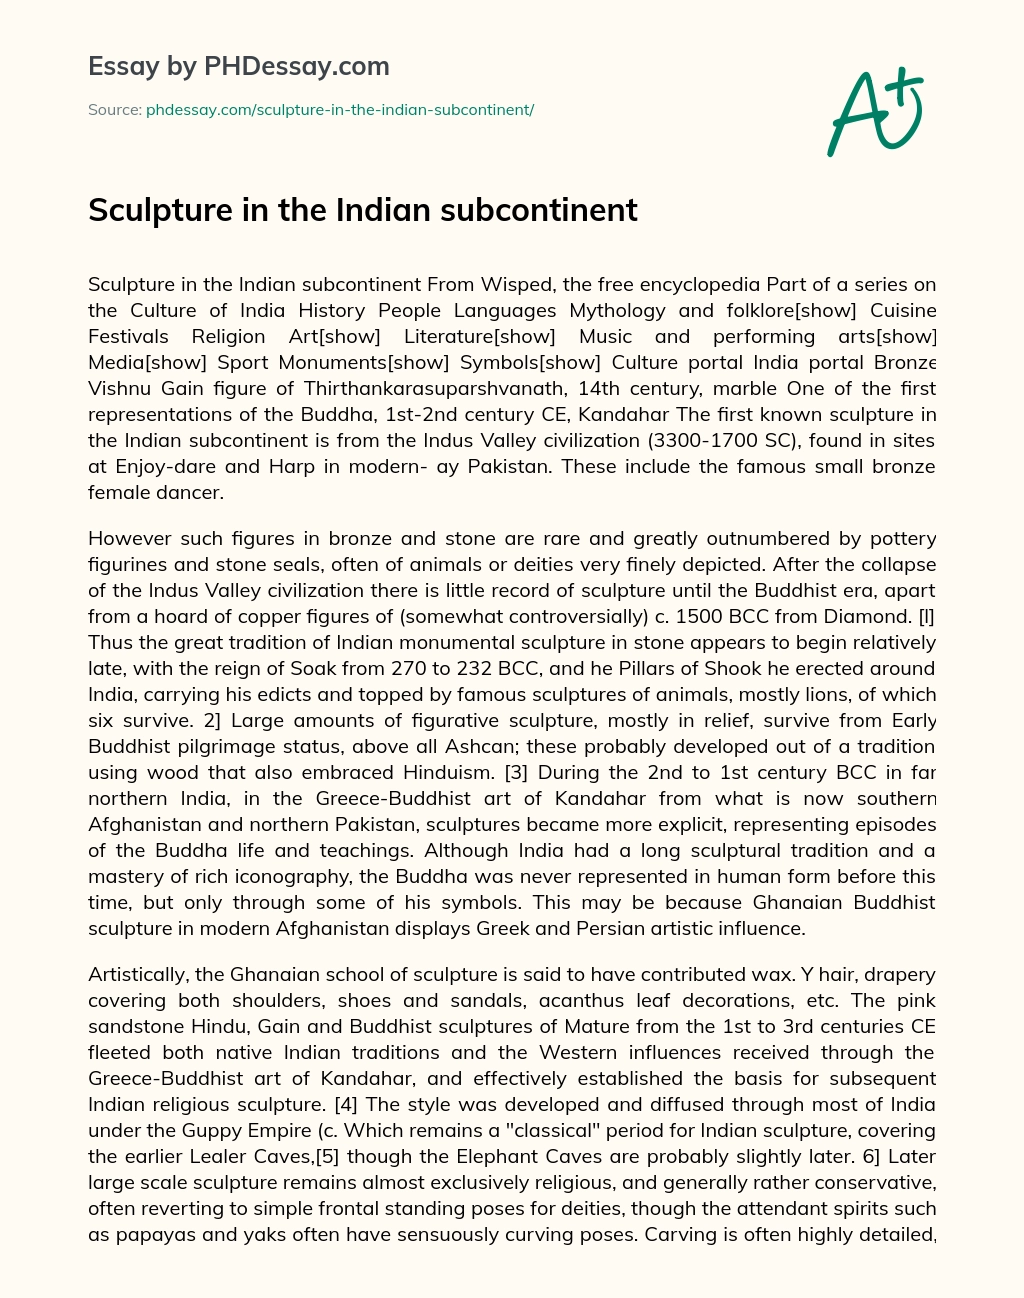 Sculpture in the Indian Subcontinent essay